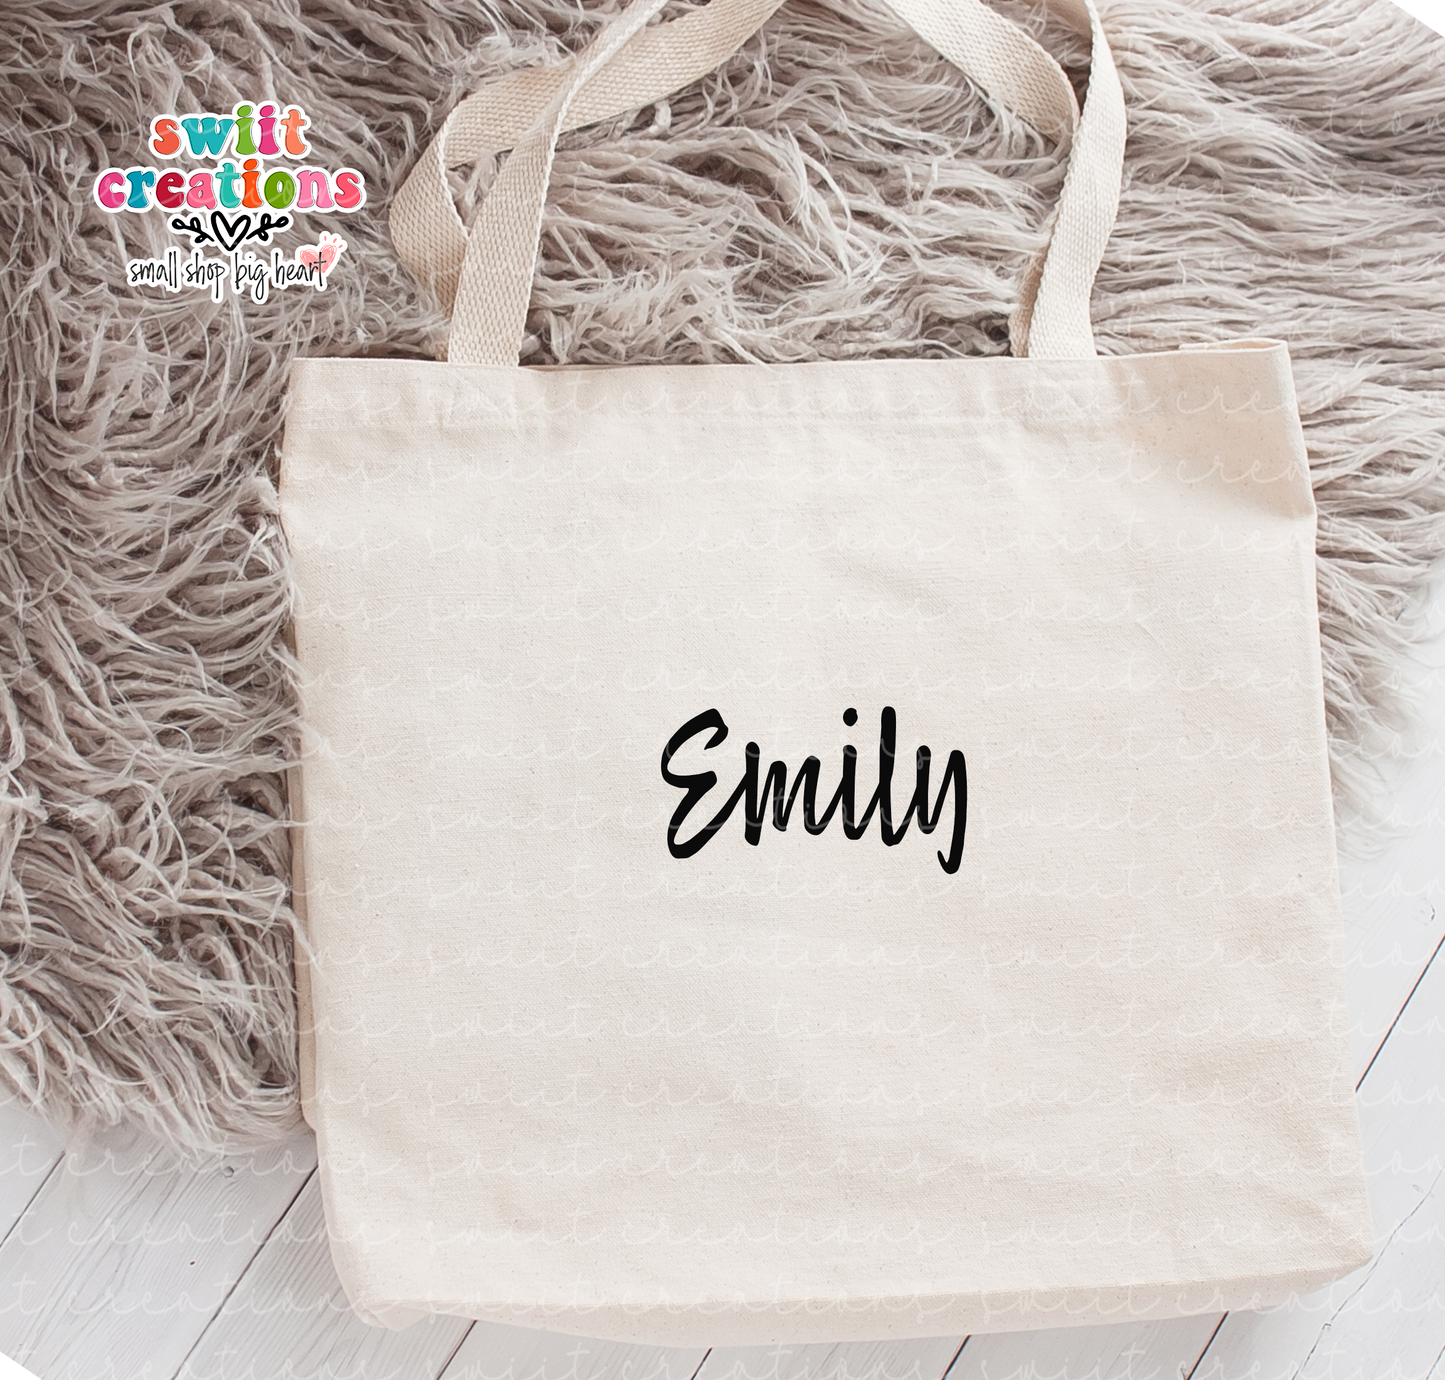 Don't Worry Be Happy Large Linen Tote